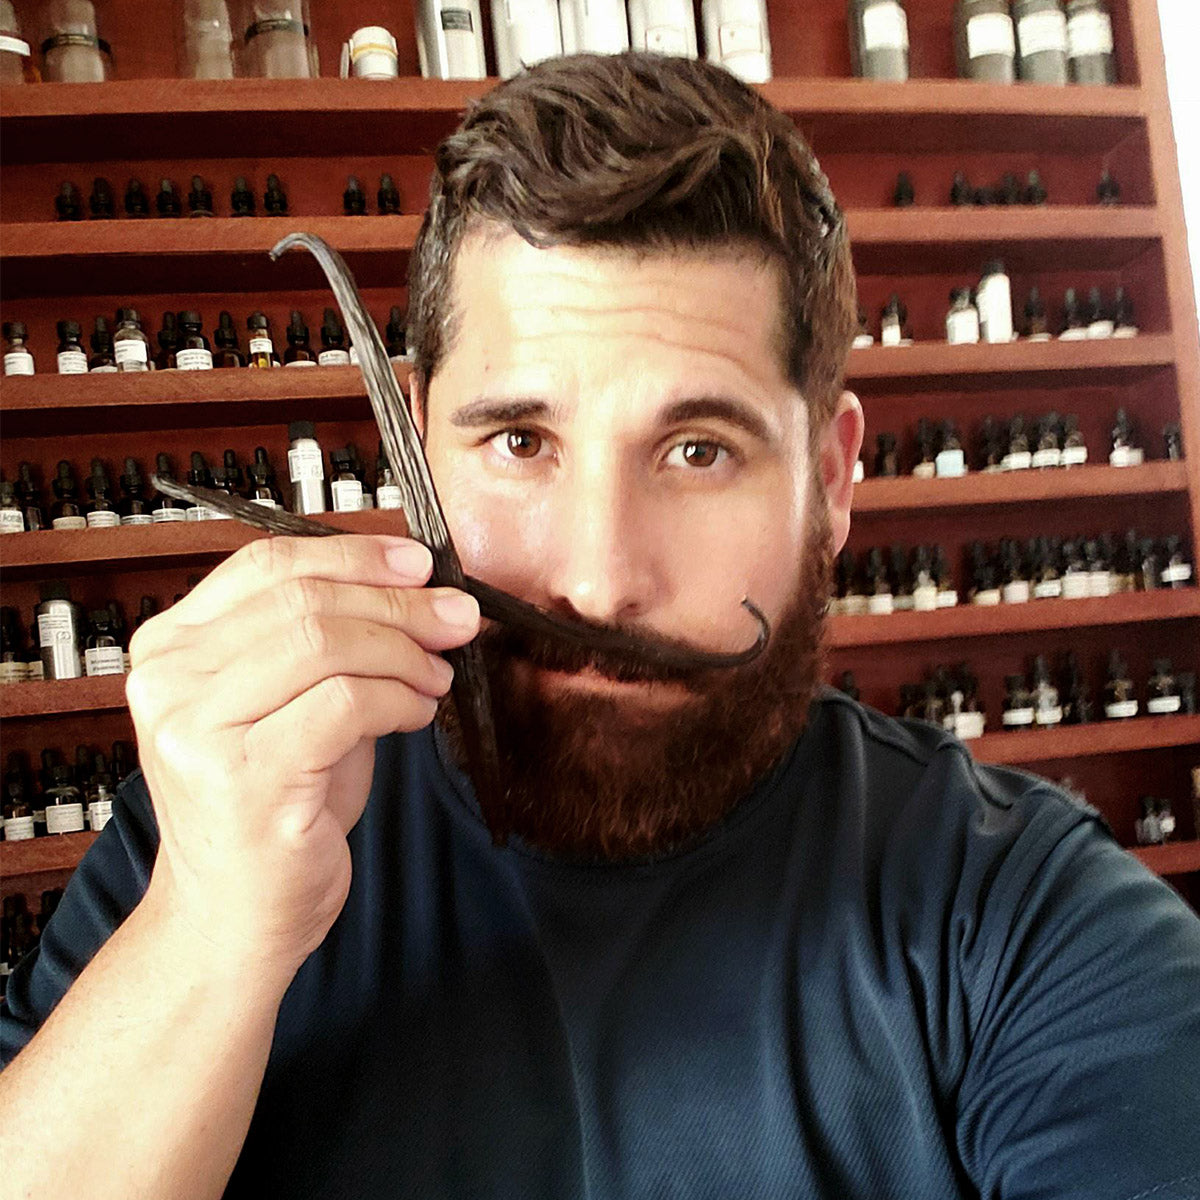 An Interview with Juan M. Perez, perfumer of Zoologist Dragonfly